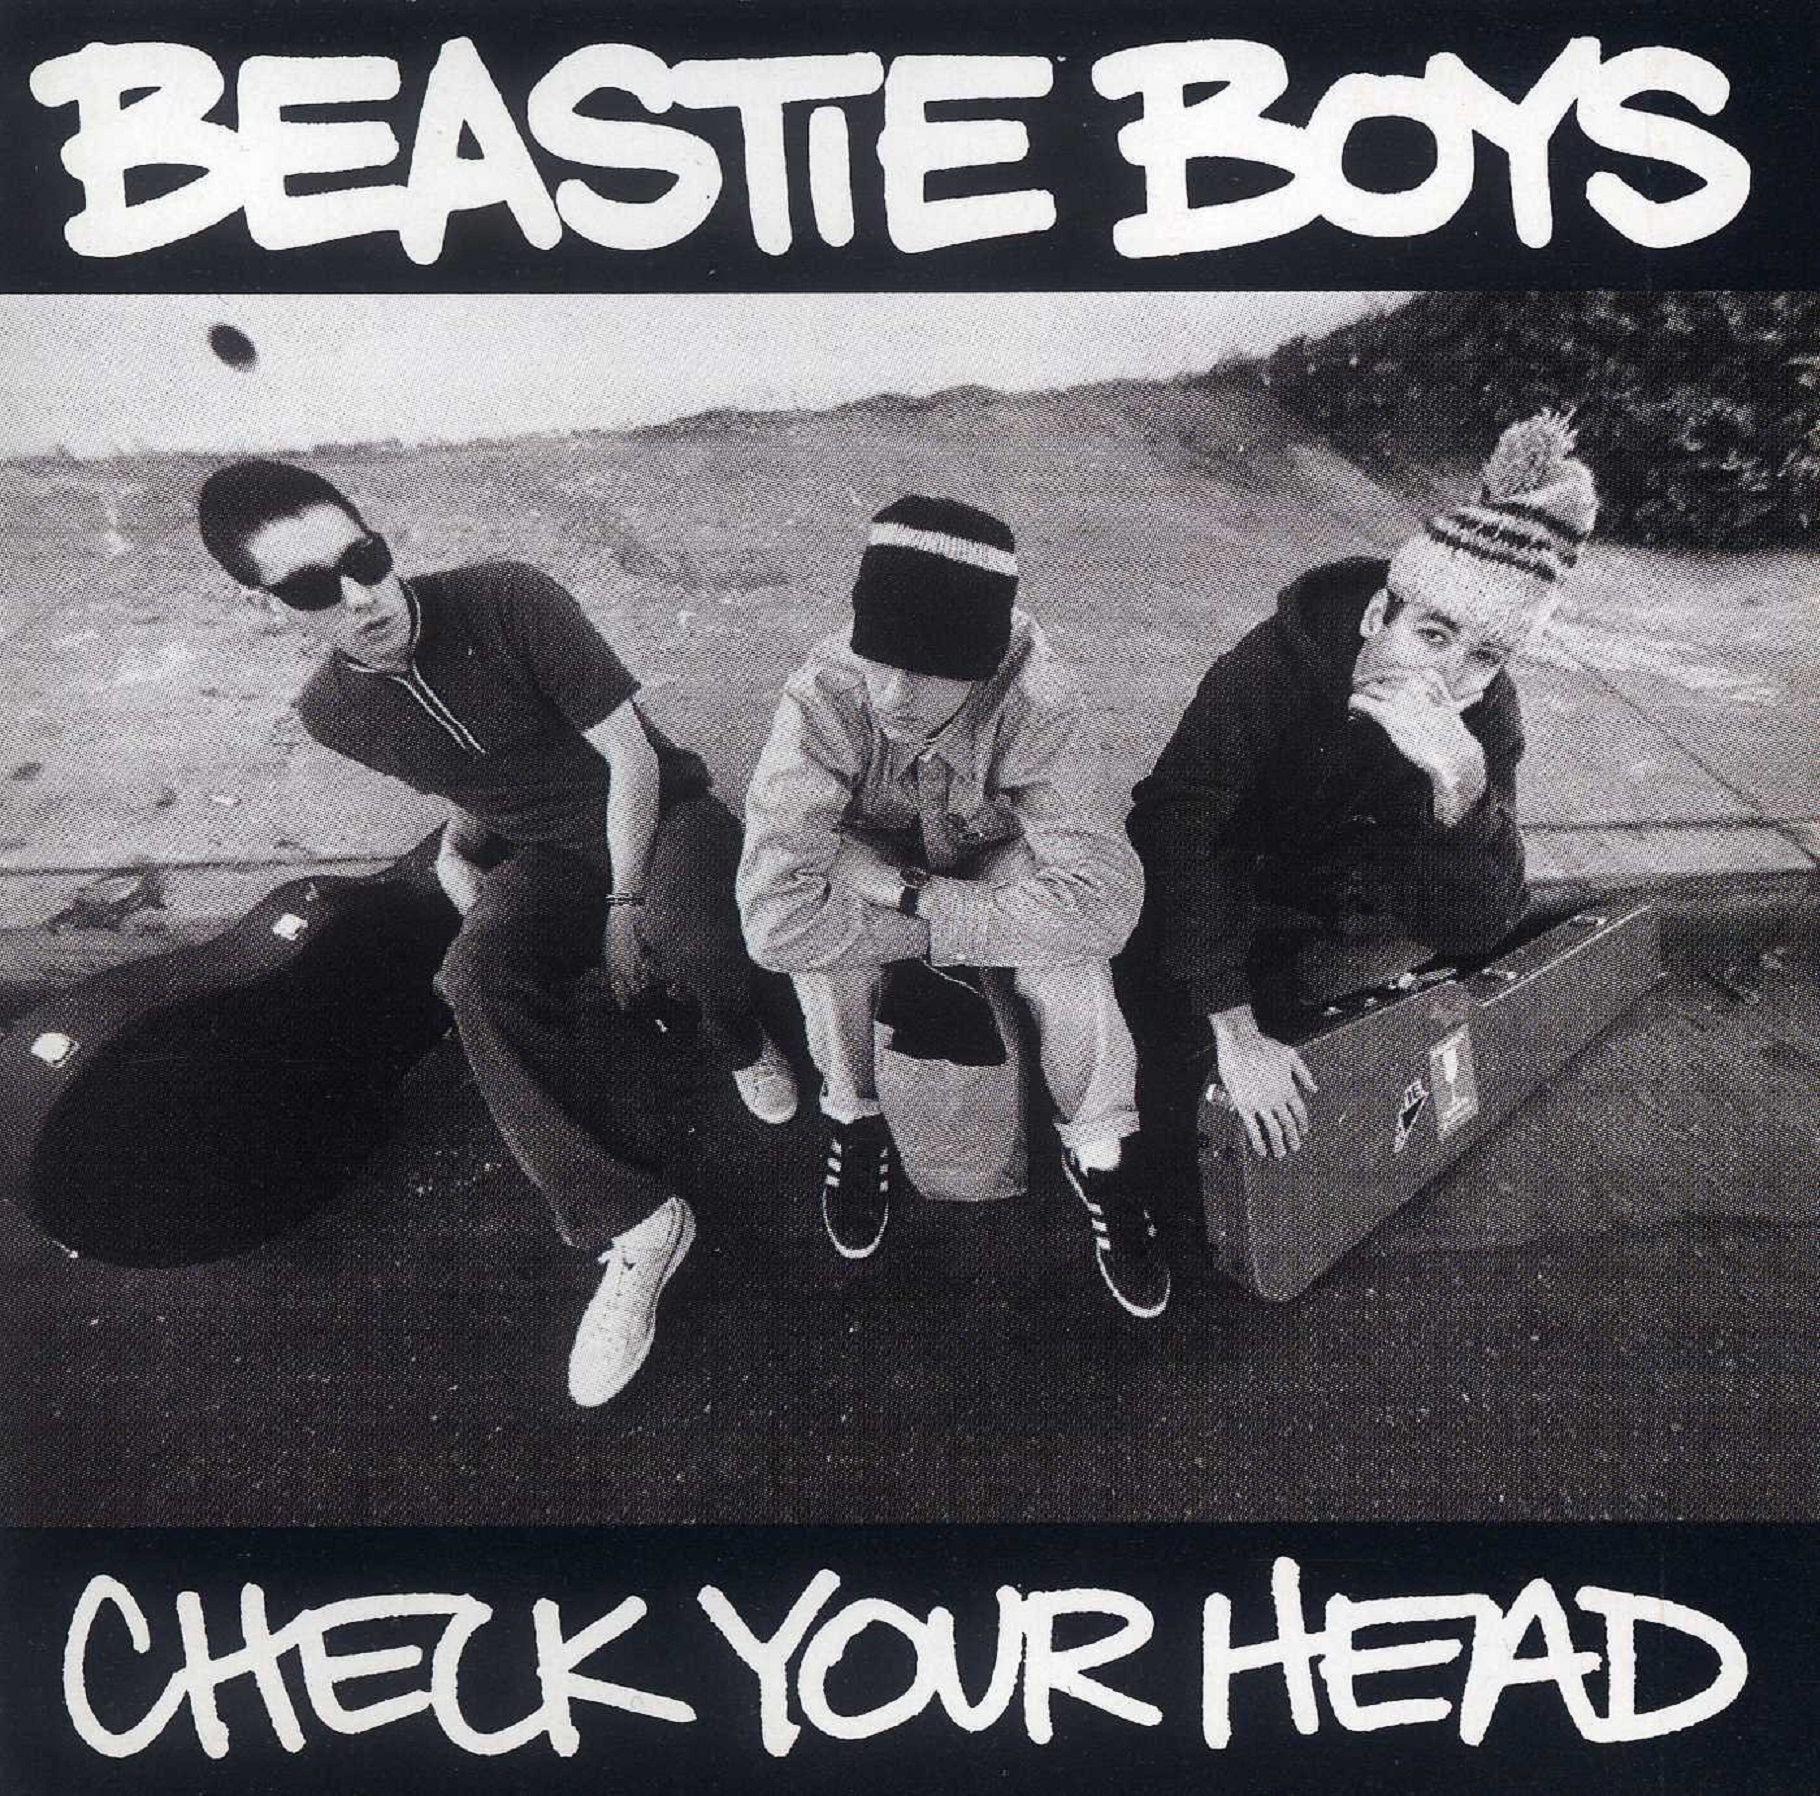 LIMITED EDITION REISSUE OF BEASTIE BOYS’ LONG OUT-OF-PRINT 4LP DELUXE EDITION OF THE MULTI-PLATINUM ALBUM CHECK YOUR HEAD TO BE RELEASED JULY 15